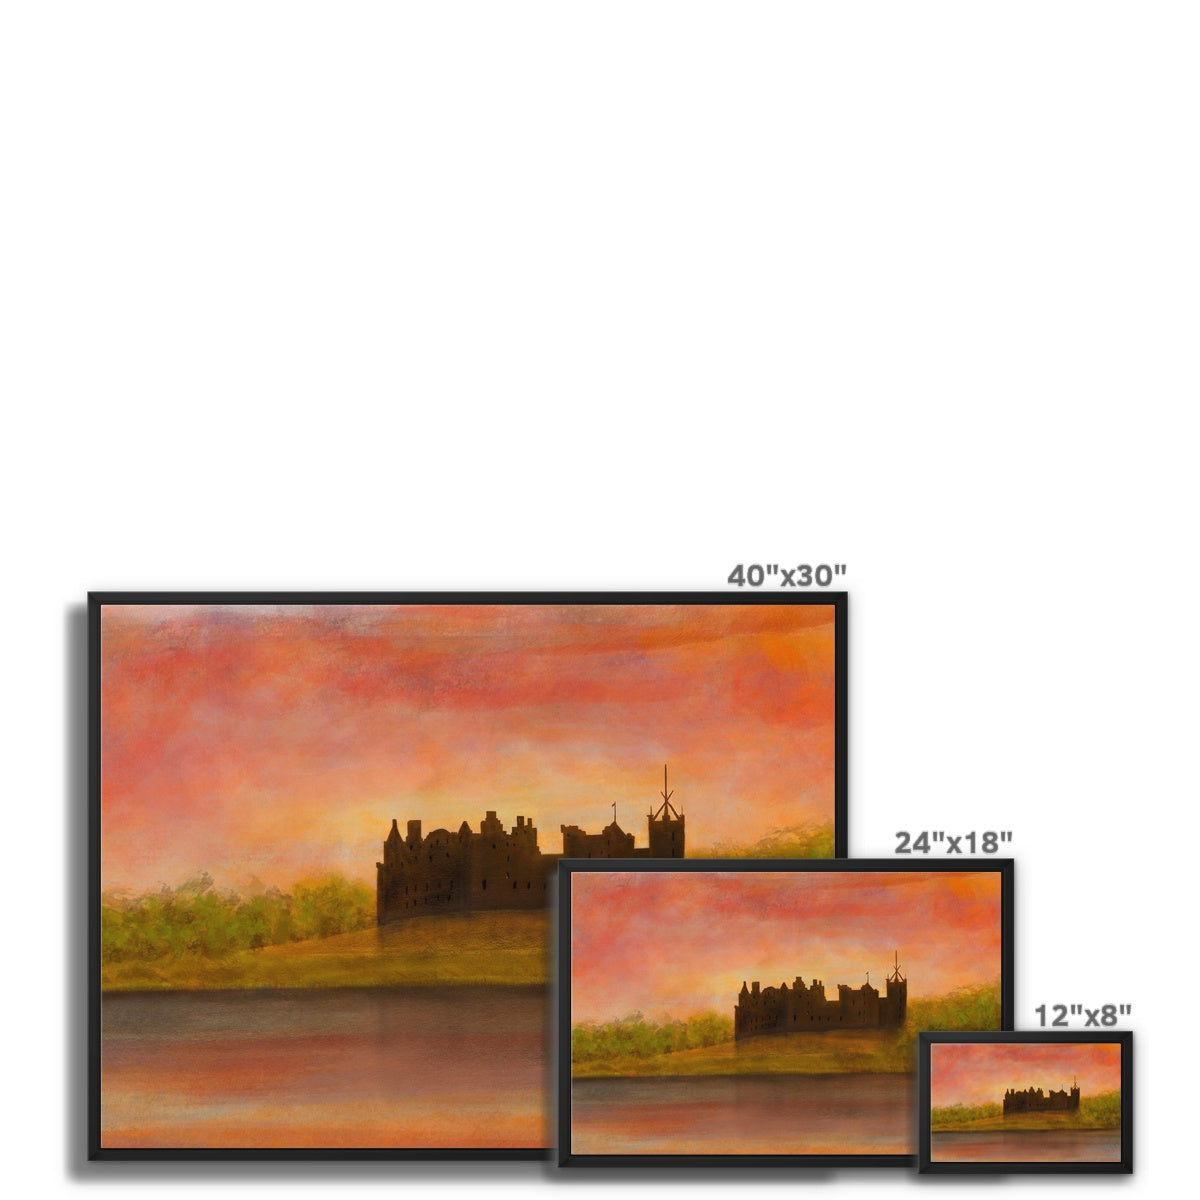 Linlithgow Palace Dusk Painting | Framed Canvas From Scotland-Floating Framed Canvas Prints-Historic & Iconic Scotland Art Gallery-Paintings, Prints, Homeware, Art Gifts From Scotland By Scottish Artist Kevin Hunter